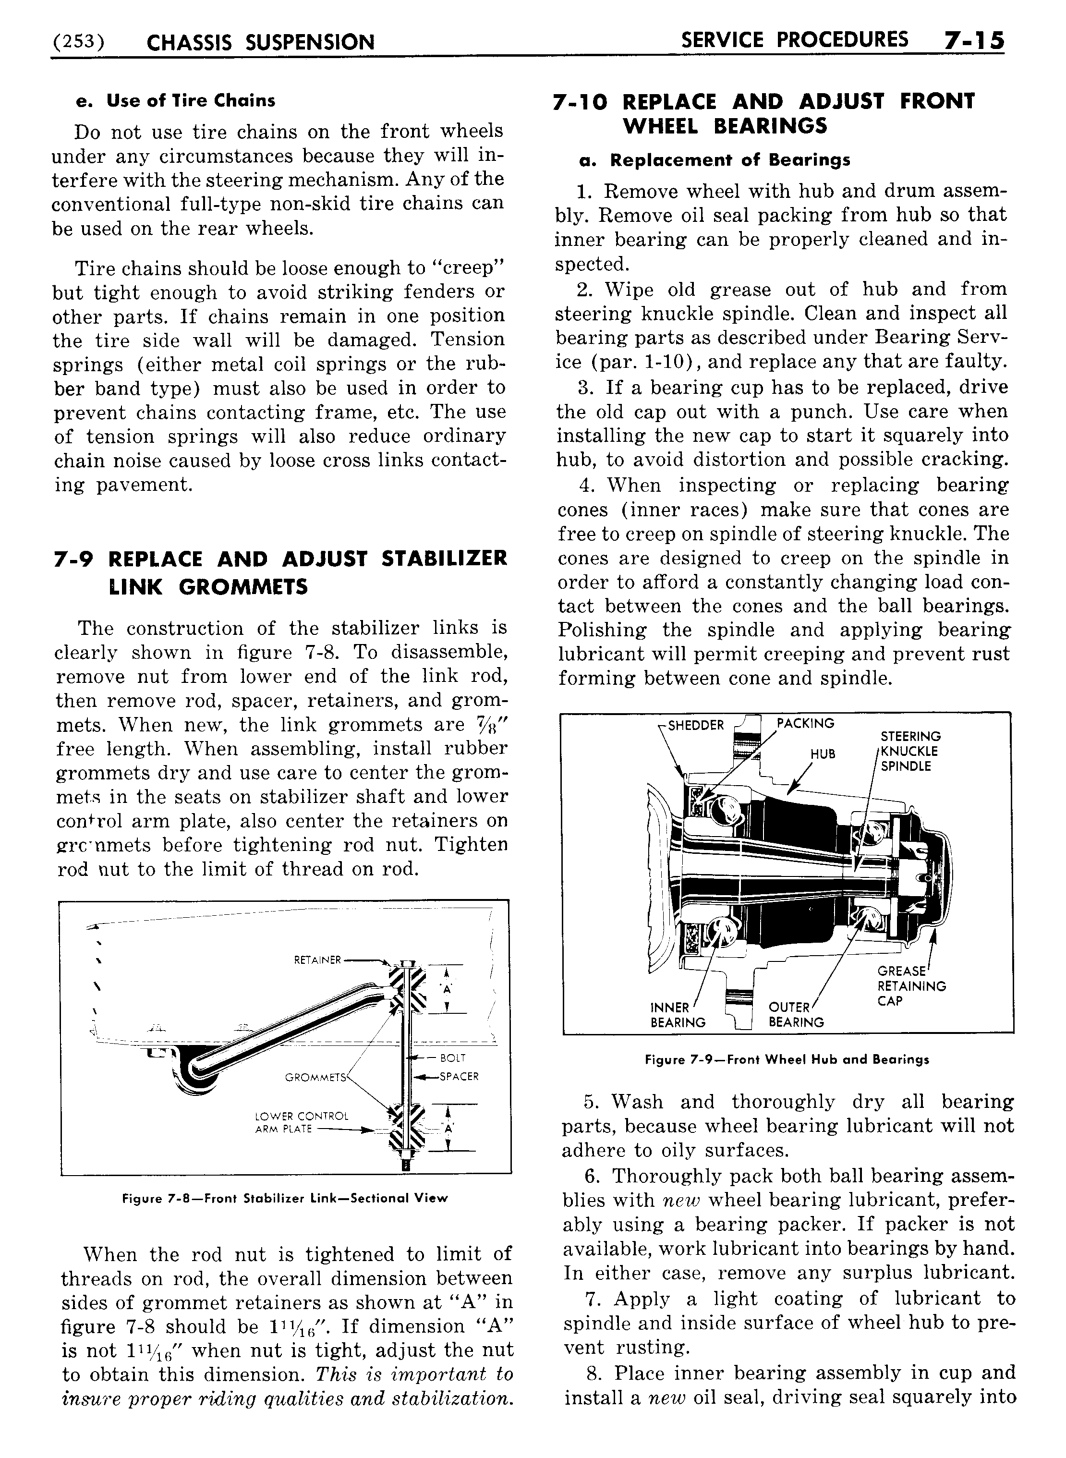 n_08 1956 Buick Shop Manual - Chassis Suspension-015-015.jpg